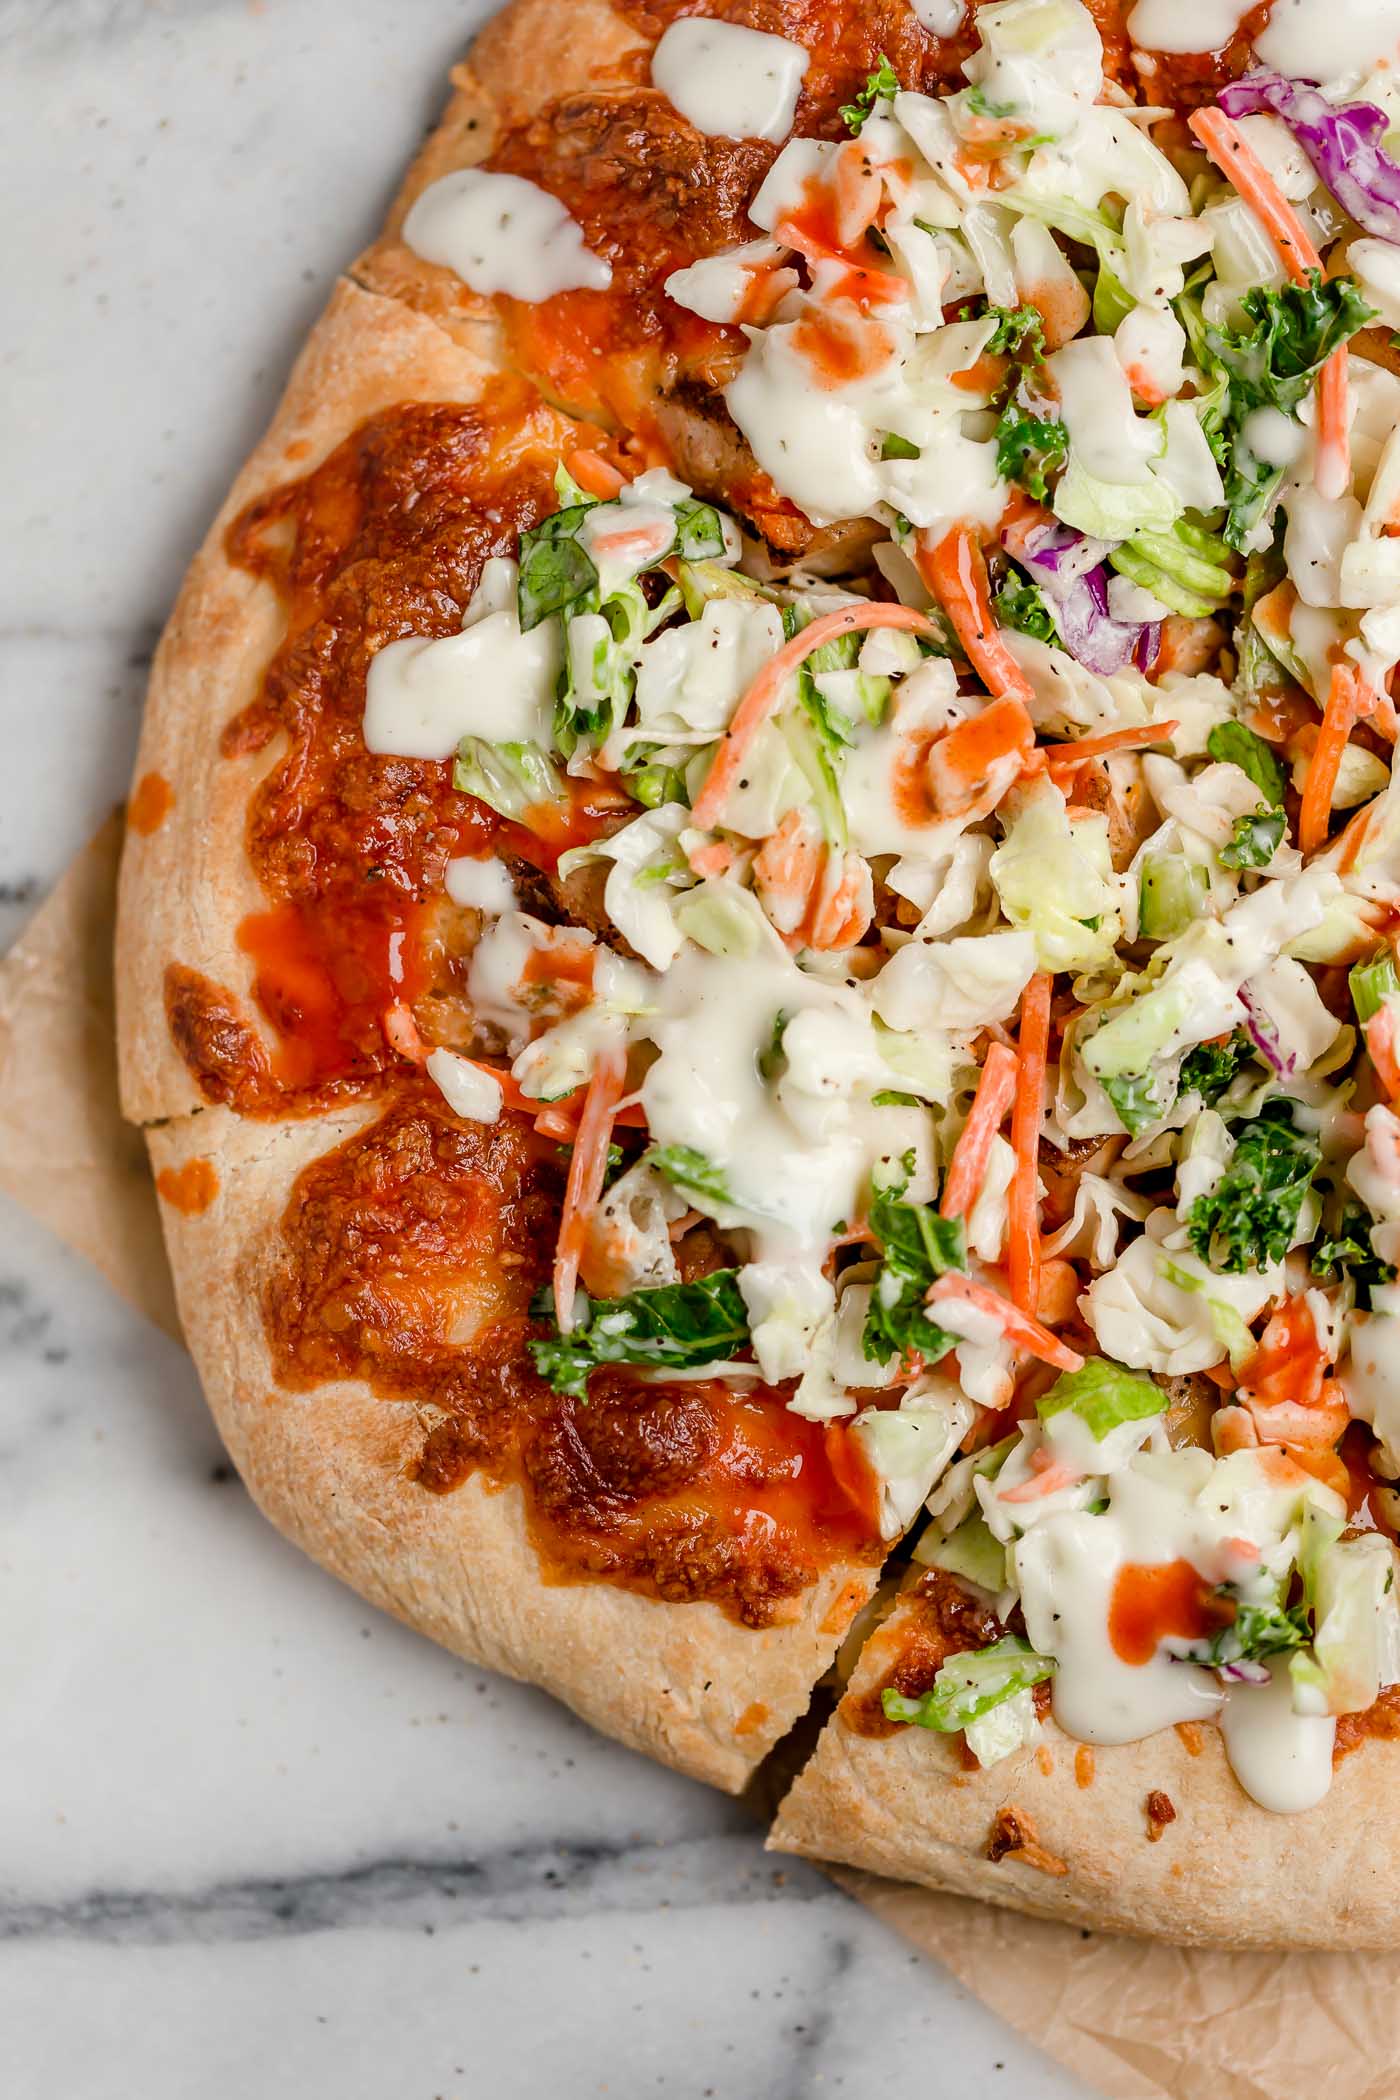 easy buffalo chicken bacon ranch pizza. the easiest buffalo chicken bacon ranch pizza, topped with a fresh & crunchy salad for a fun twist on pizza night! with only 5 ingredients, this buffalo chicken bacon ranch pizza is perfect for an easy weeknight pizza dinner & great for game day parties this fall! #playswellwithbutter #homemadepizza #buffalochickenpizza #chickenbaconranchpizza #pizzanight #easypizzarecipe #easydinnerrecipe #gamedayfood #partyfood